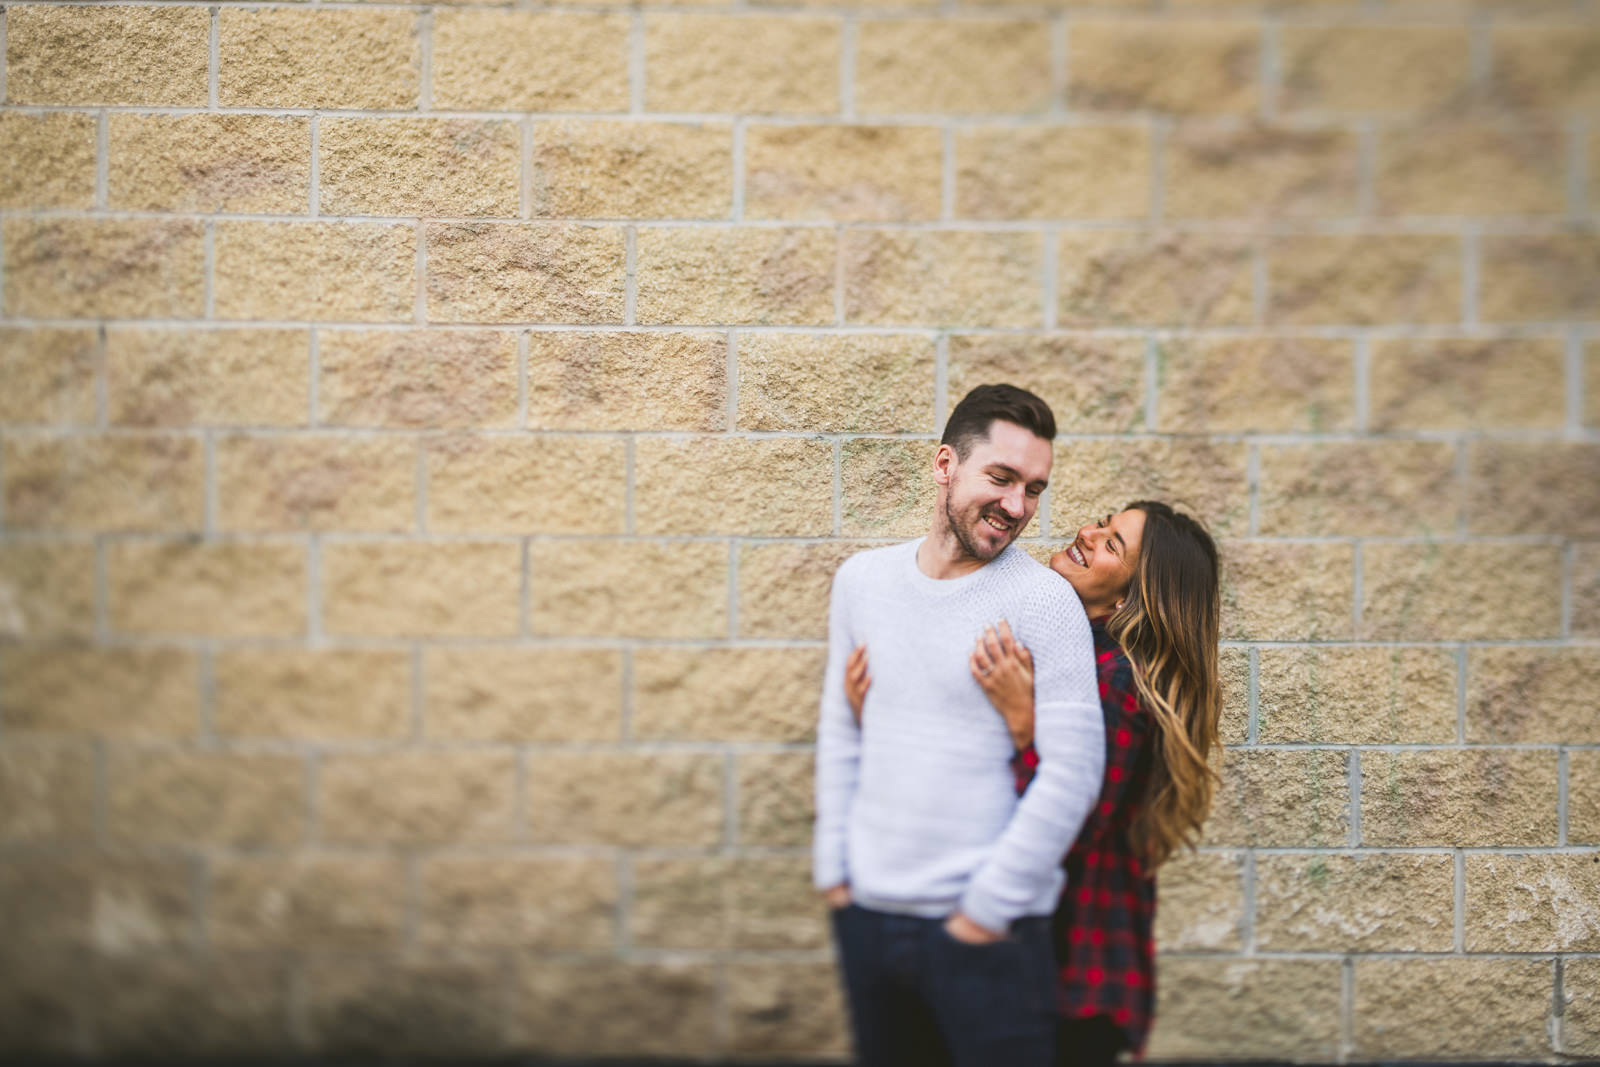 06 brick engagement photos - Joanna + Jamie // Engagement session in West Lakeview and Lincoln Park